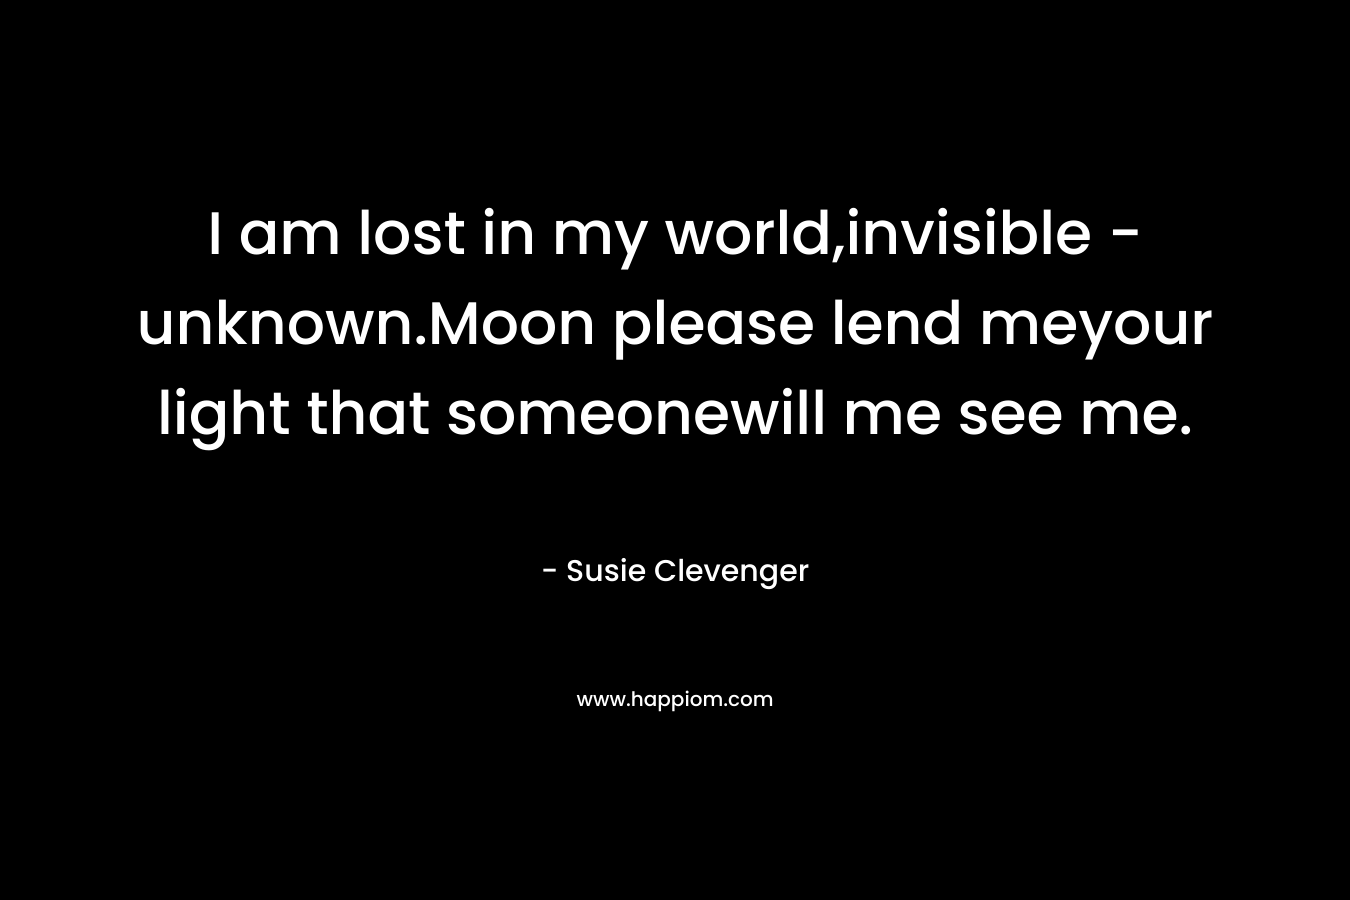 I am lost in my world,invisible - unknown.Moon please lend meyour light that someonewill me see me.